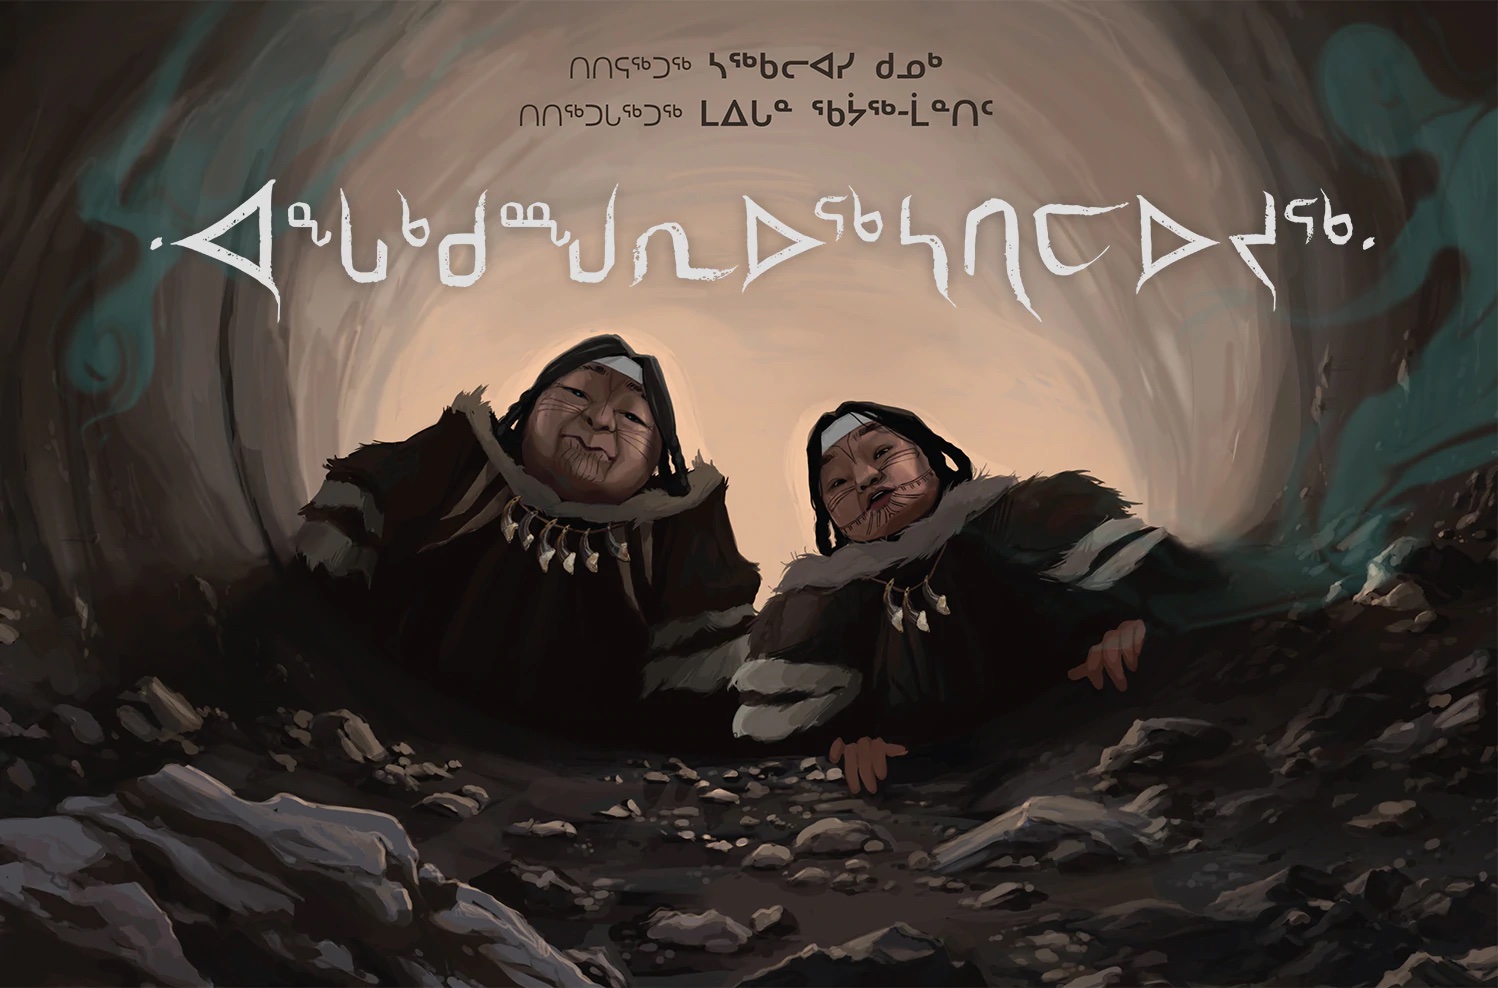 Book cover of the Inuktitut version of The Shaman's Apprentice